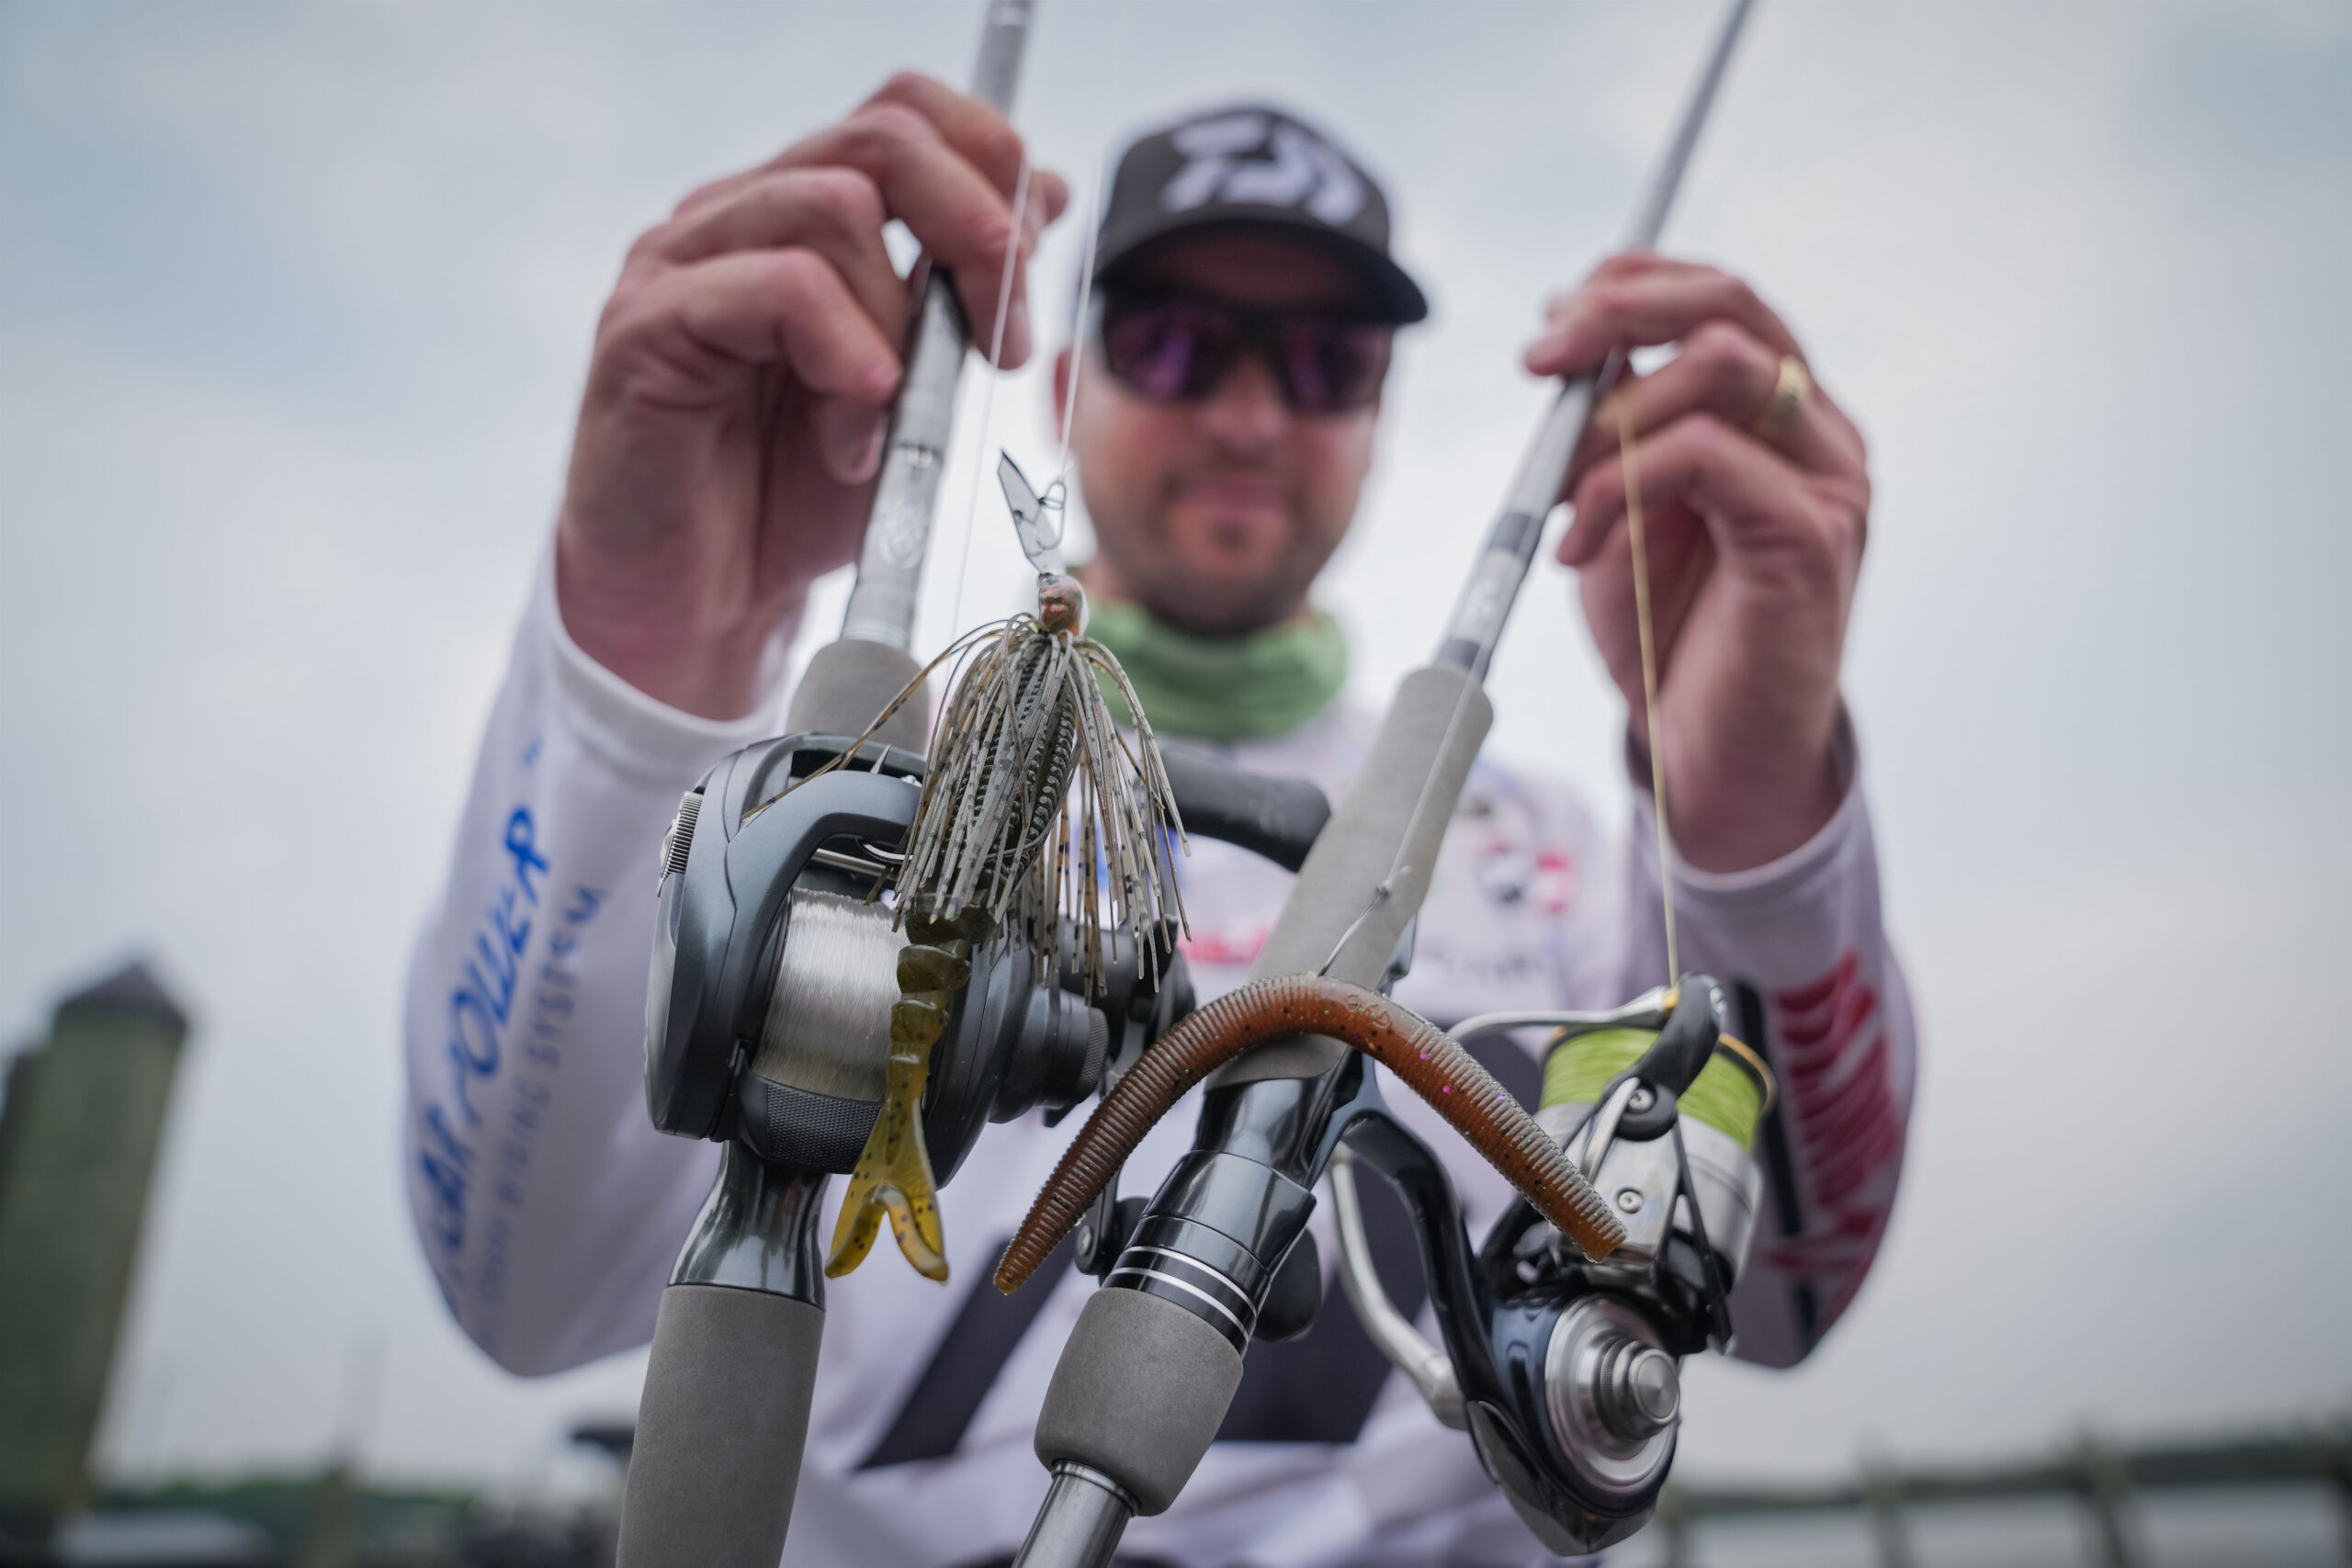 Top 10 baits and patterns from the Potomac River - Major League